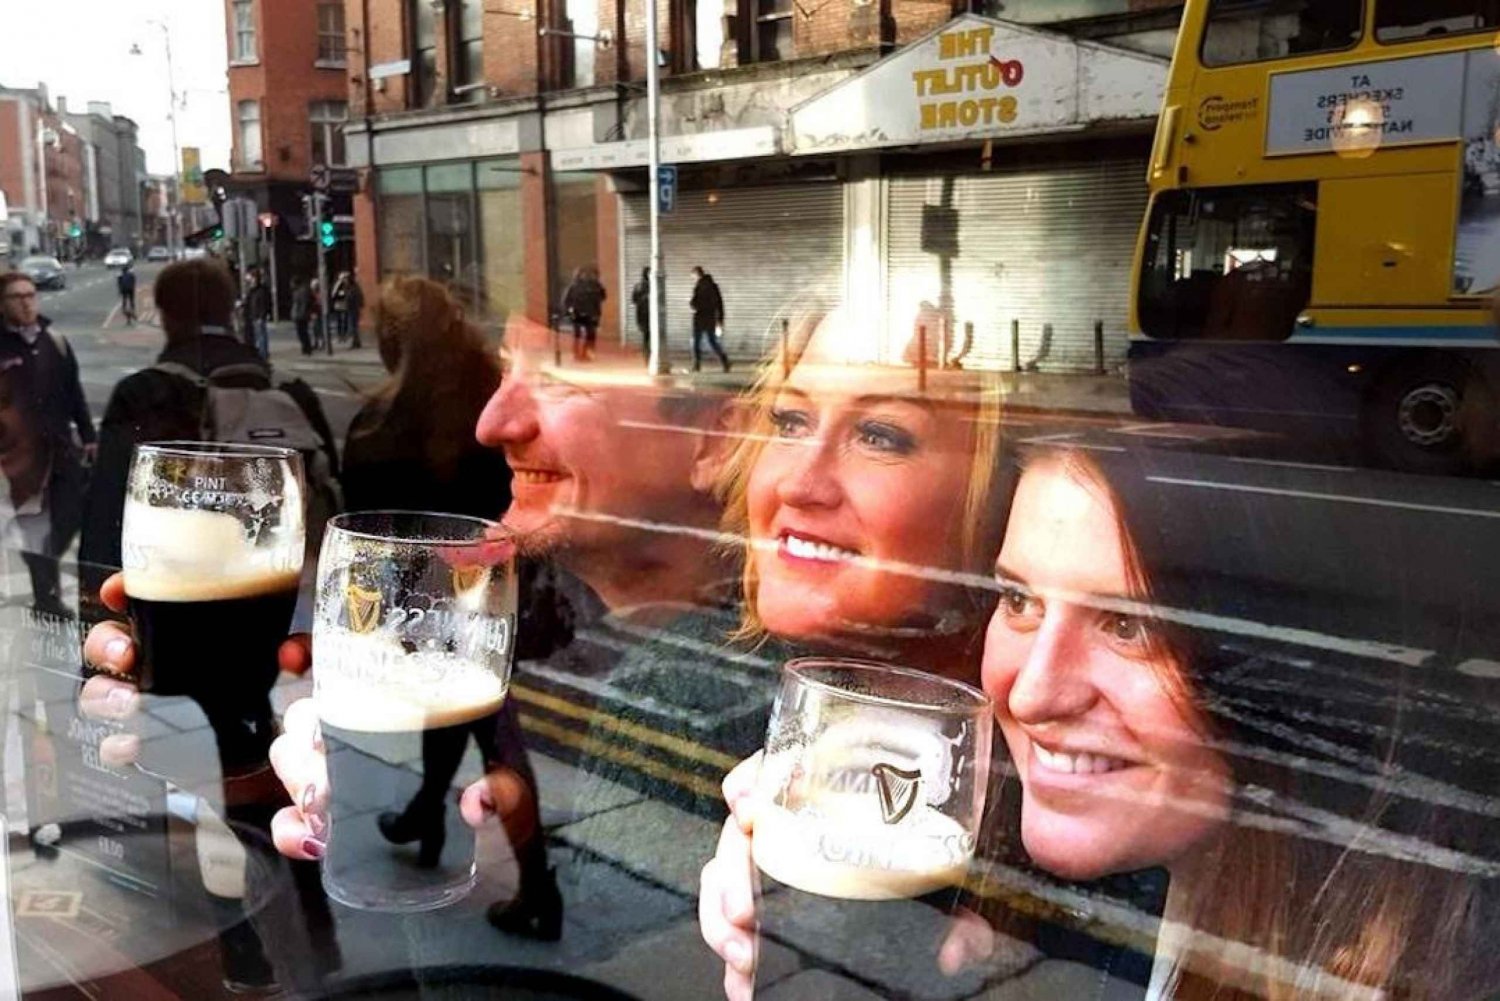 Dublin: Sights and Pints Tour